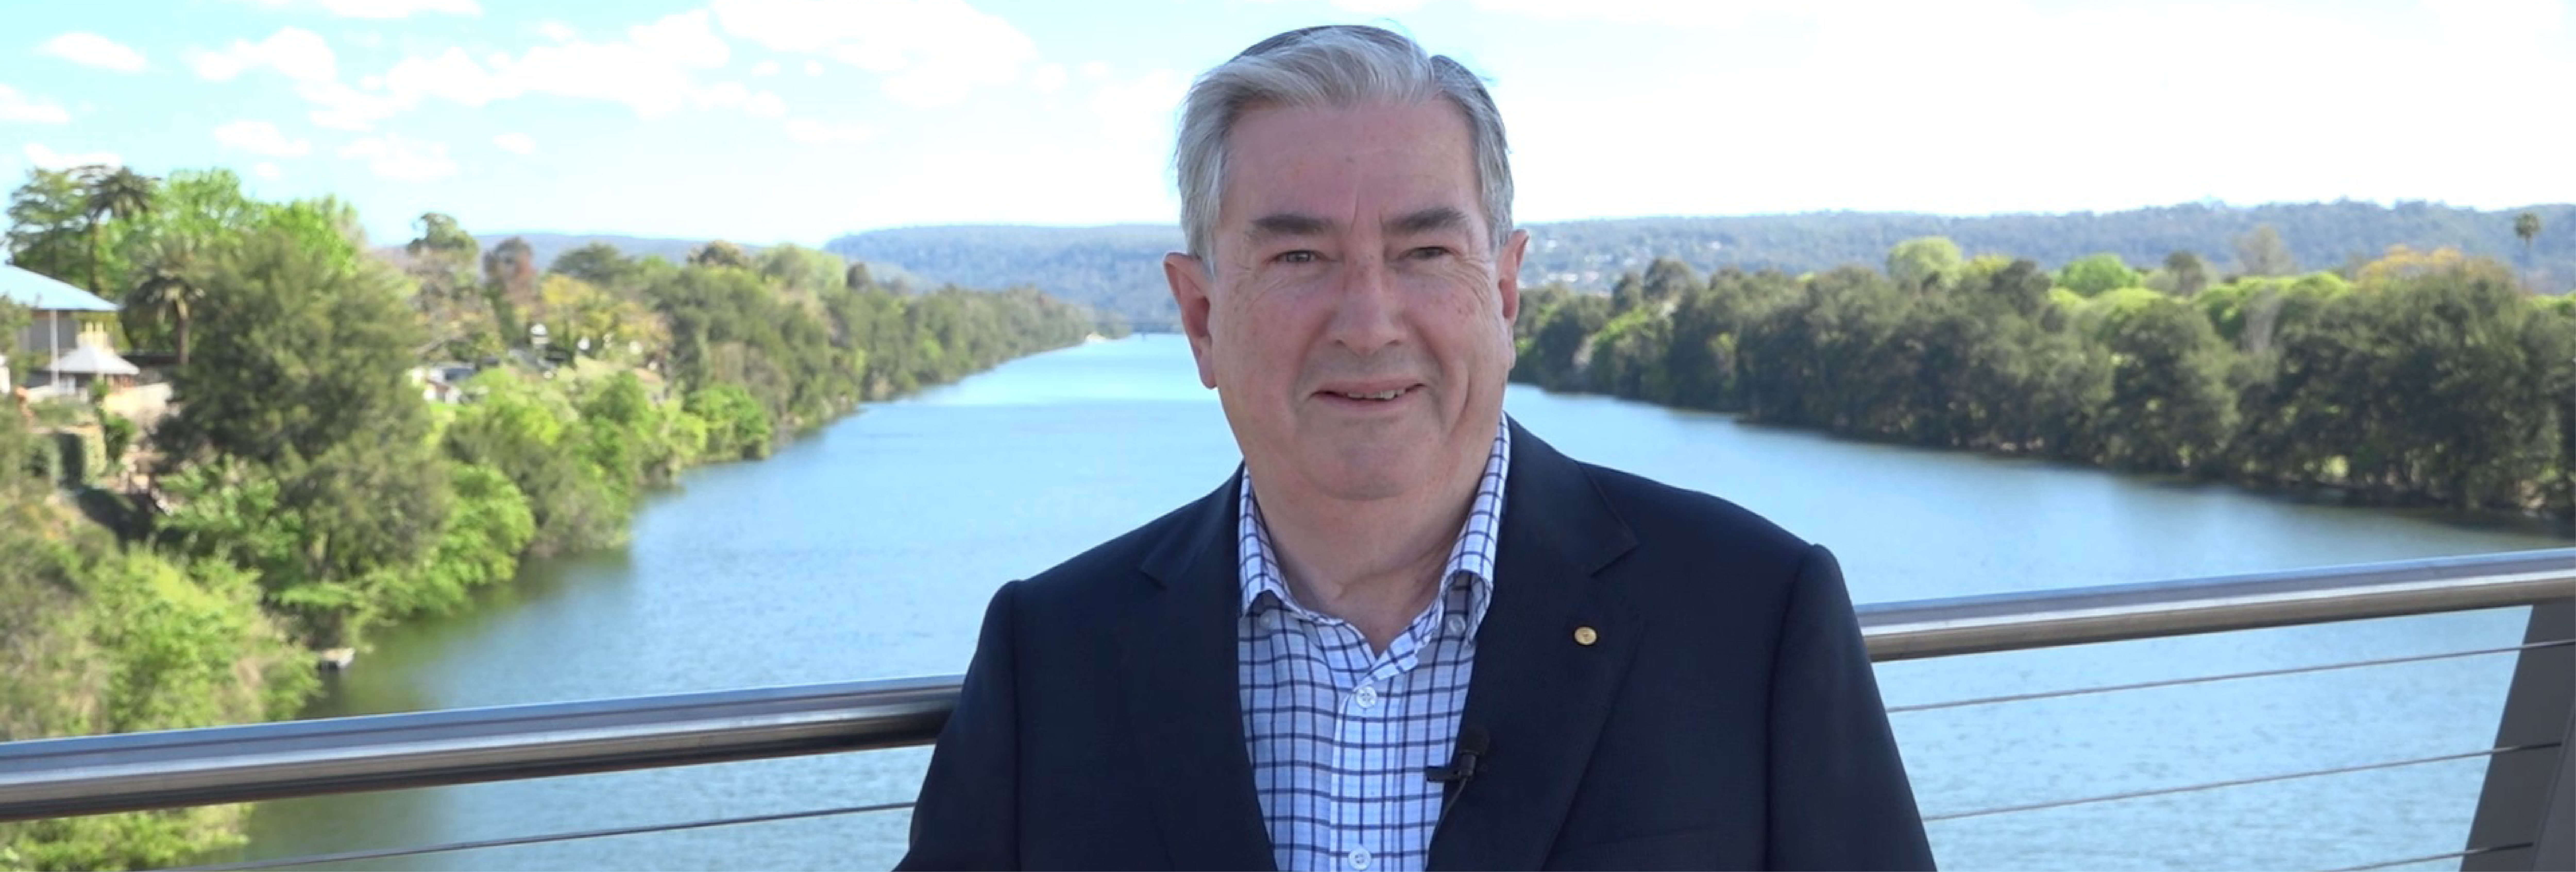 Penrith Mayor Ross Fowler OAM standing in front of the Nepean River